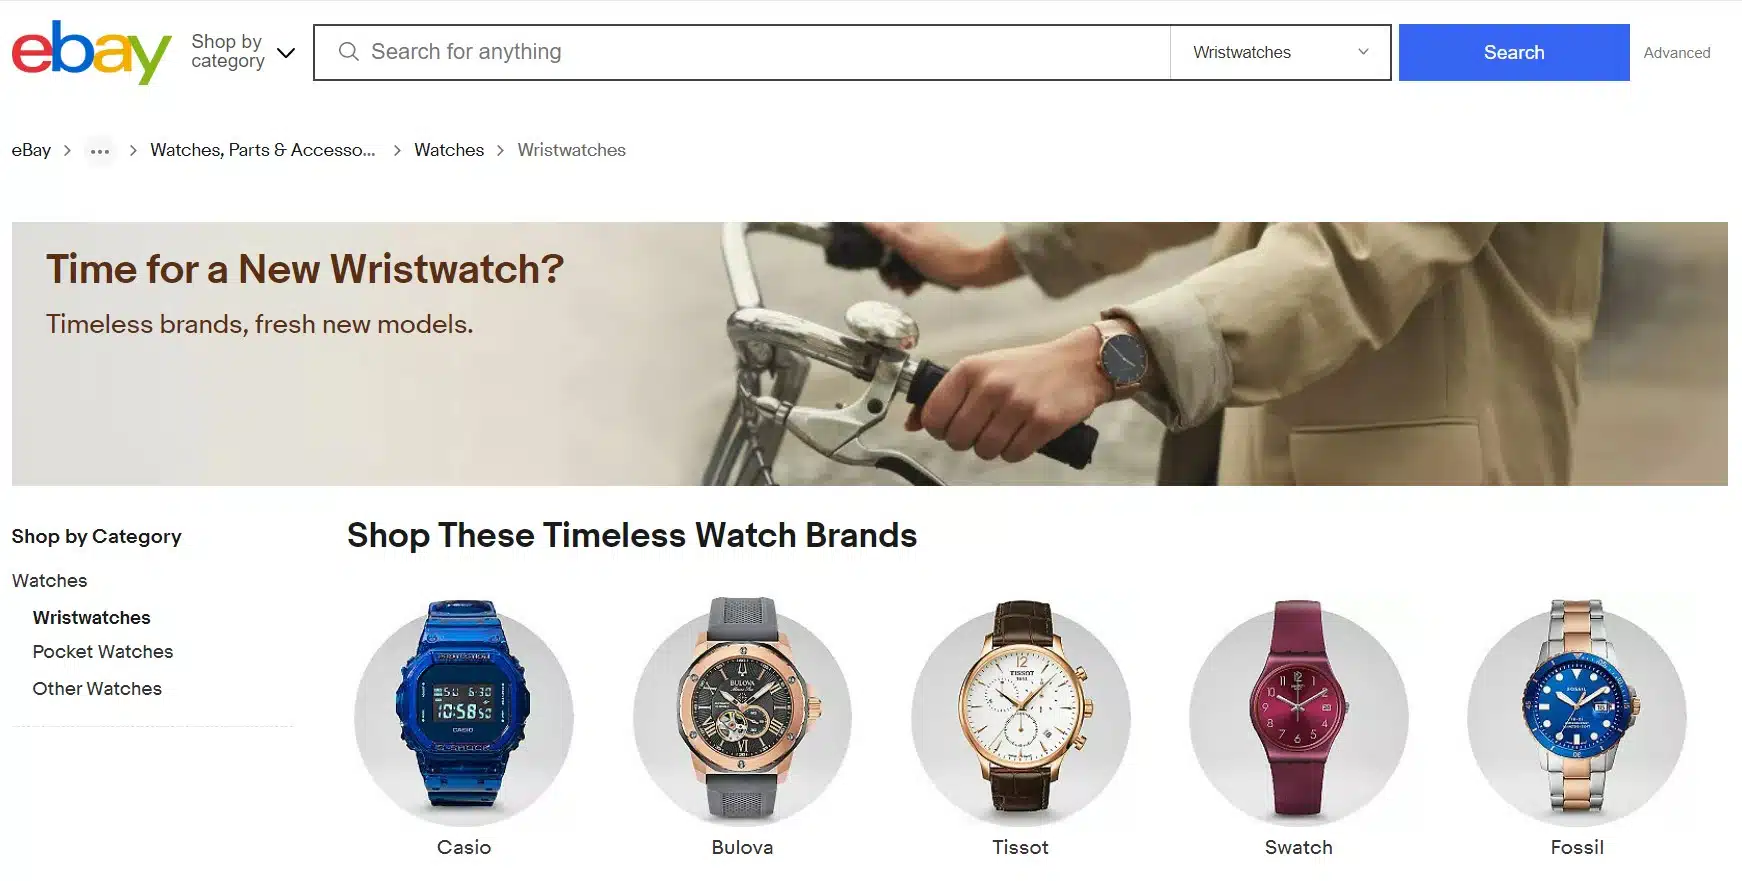 ebay Watches Page